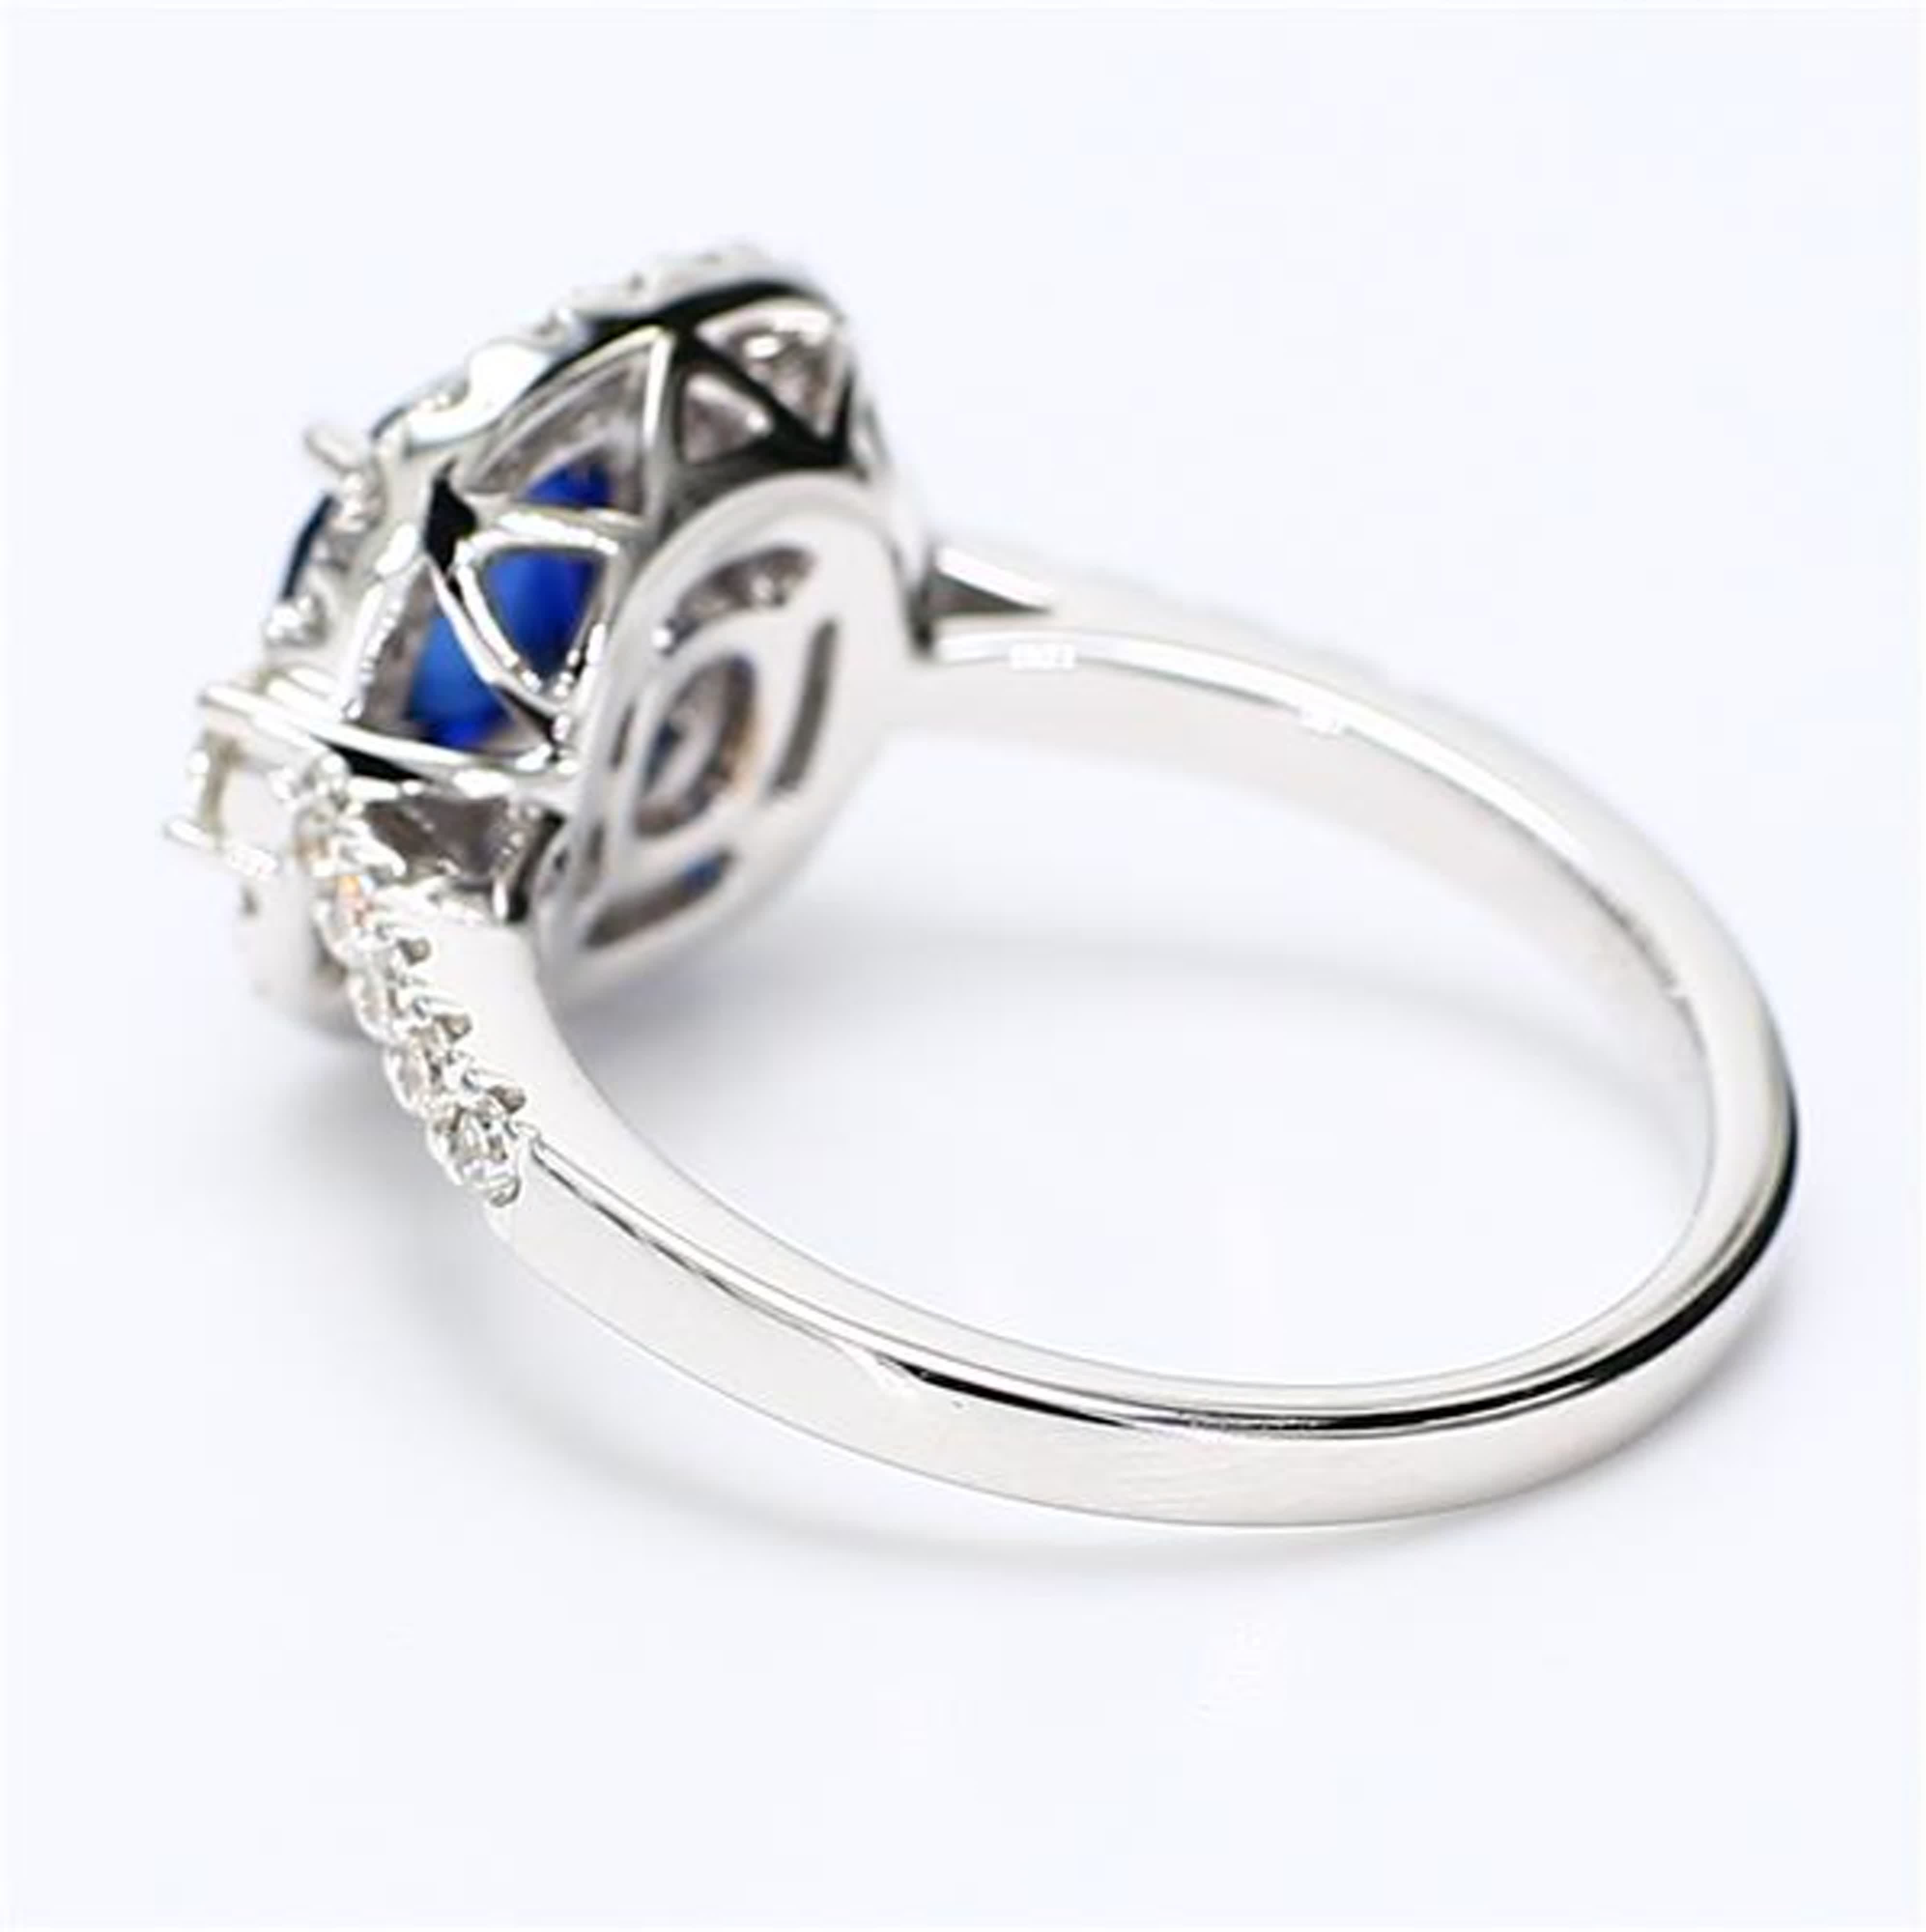 Natural Blue Cushion Sapphire and White Diamond 1.71 Carat TW White Gold Ring